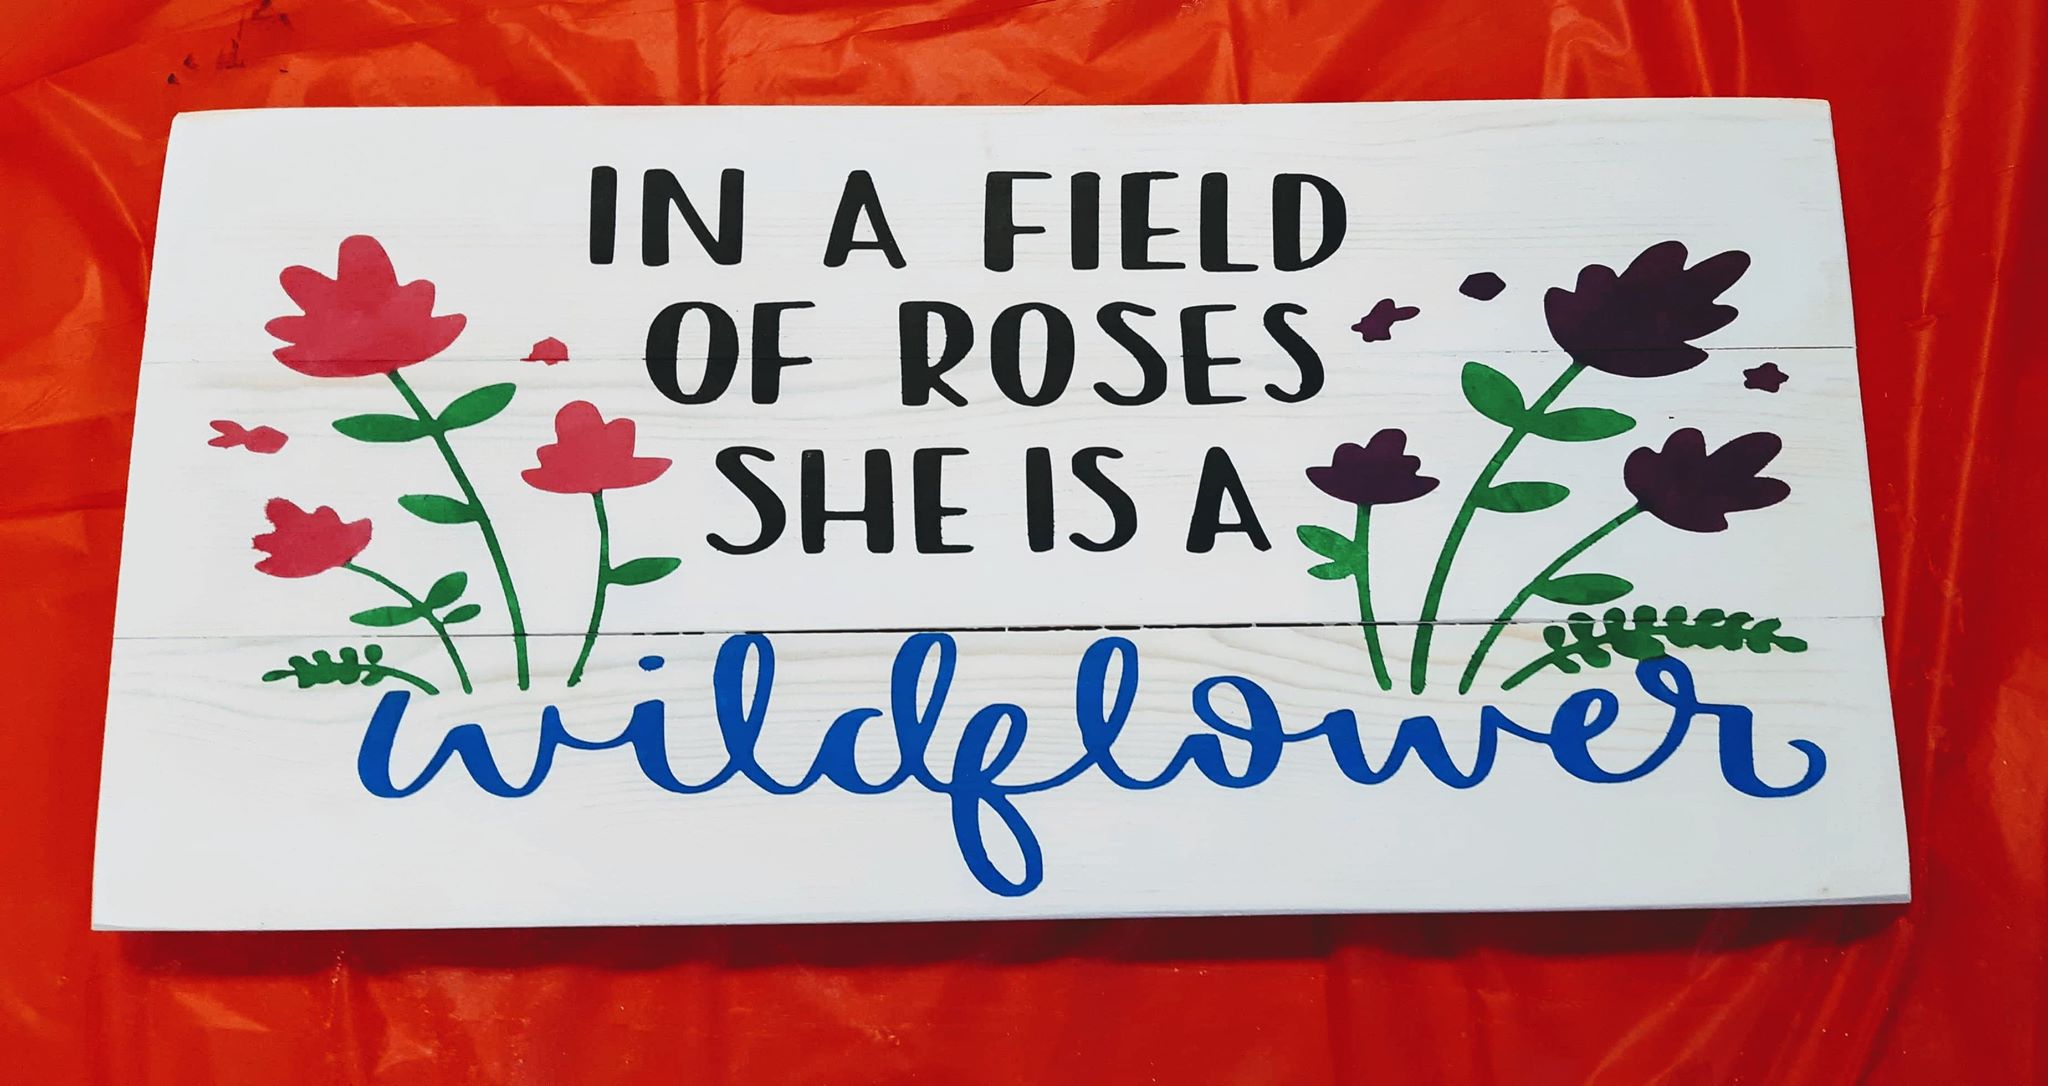 In a field of roses she is a wildflower Poster for Sale by Mqcreations